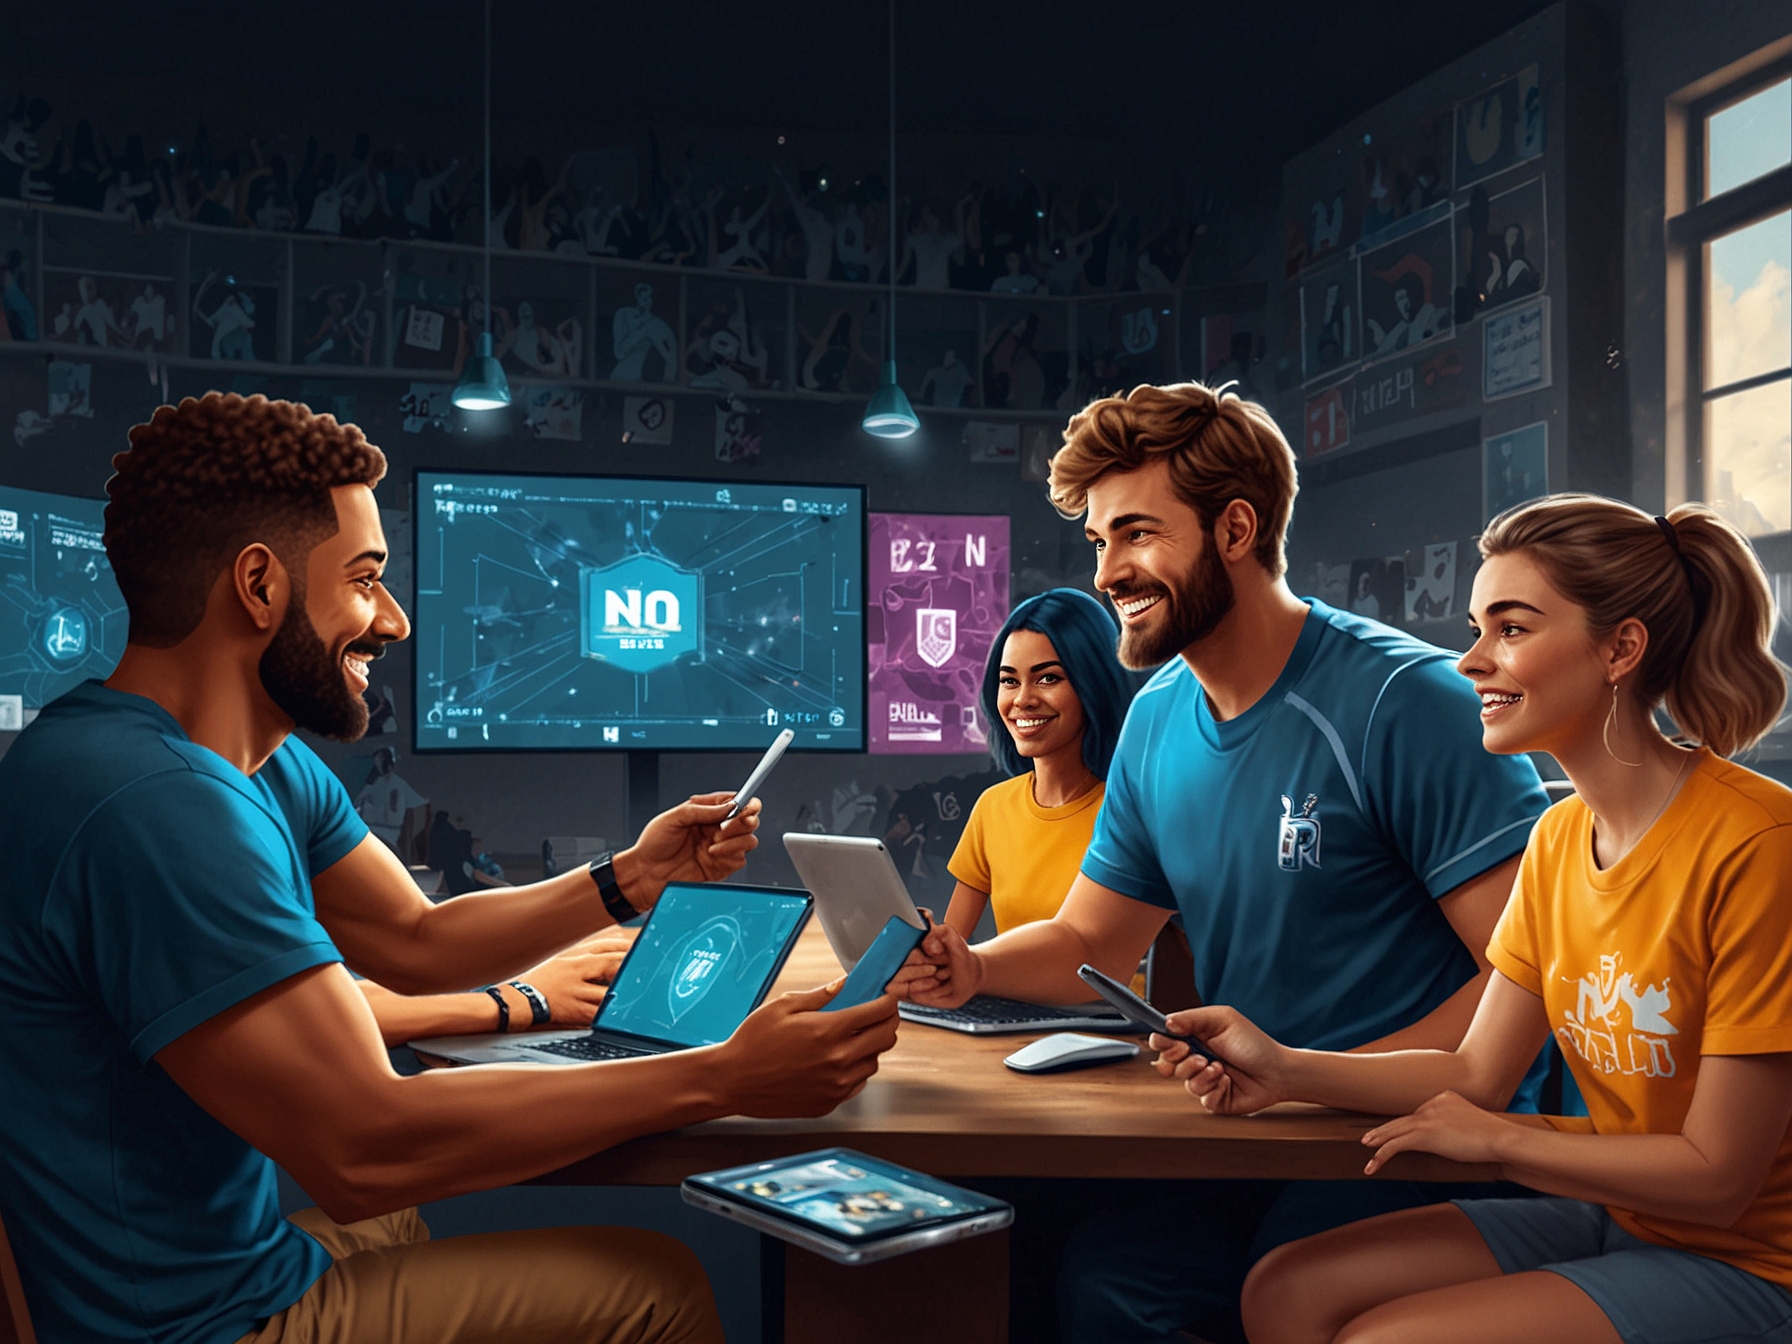 An image showing sports fans engaging with a digital platform featuring blockchain technology, showcasing NFTs, digital collectibles, and interactive polls related to their favorite sports teams.